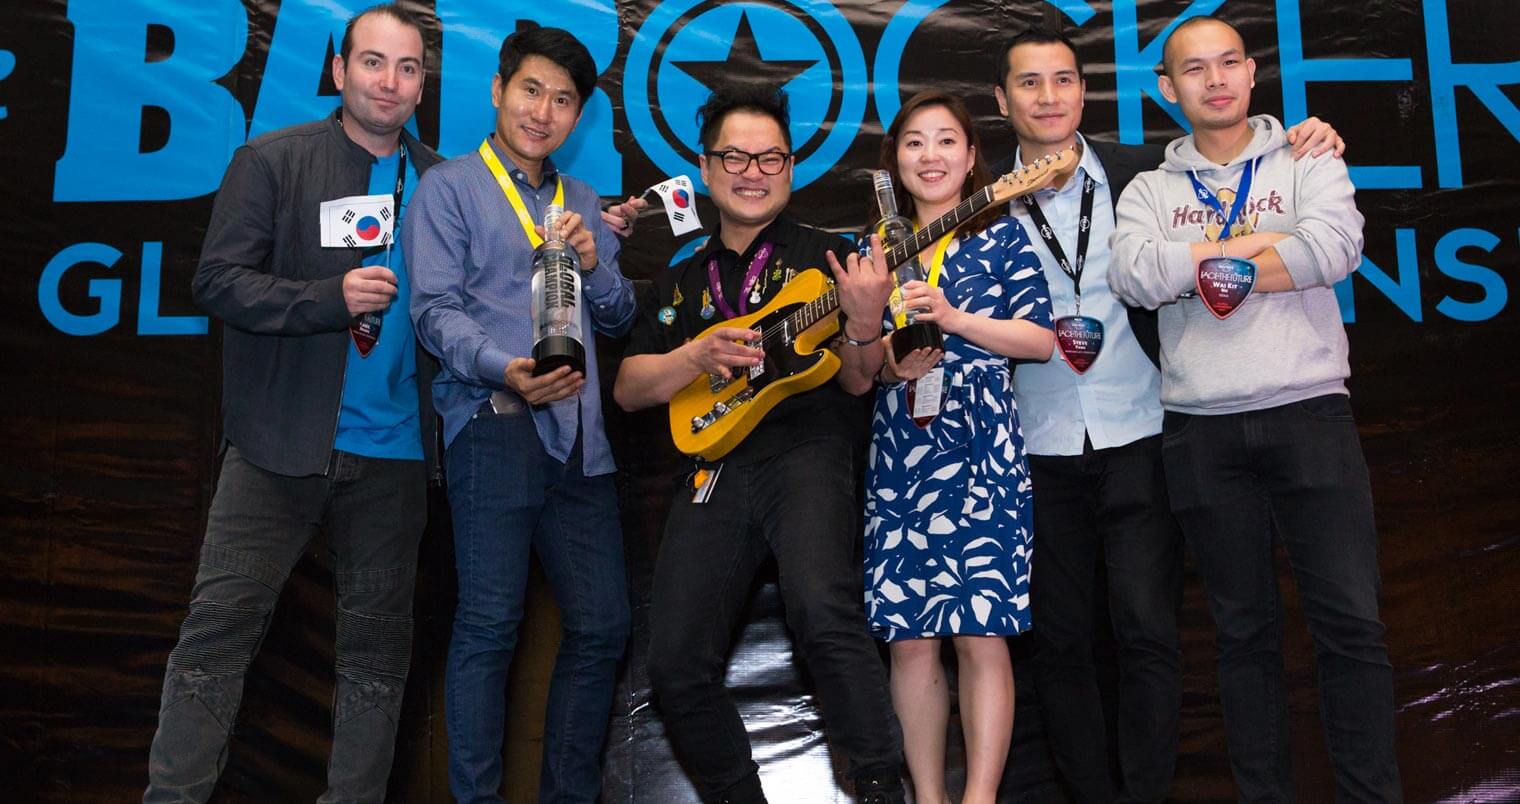 Hard Rock Announces Winner of Global Bartending Competition , featured image